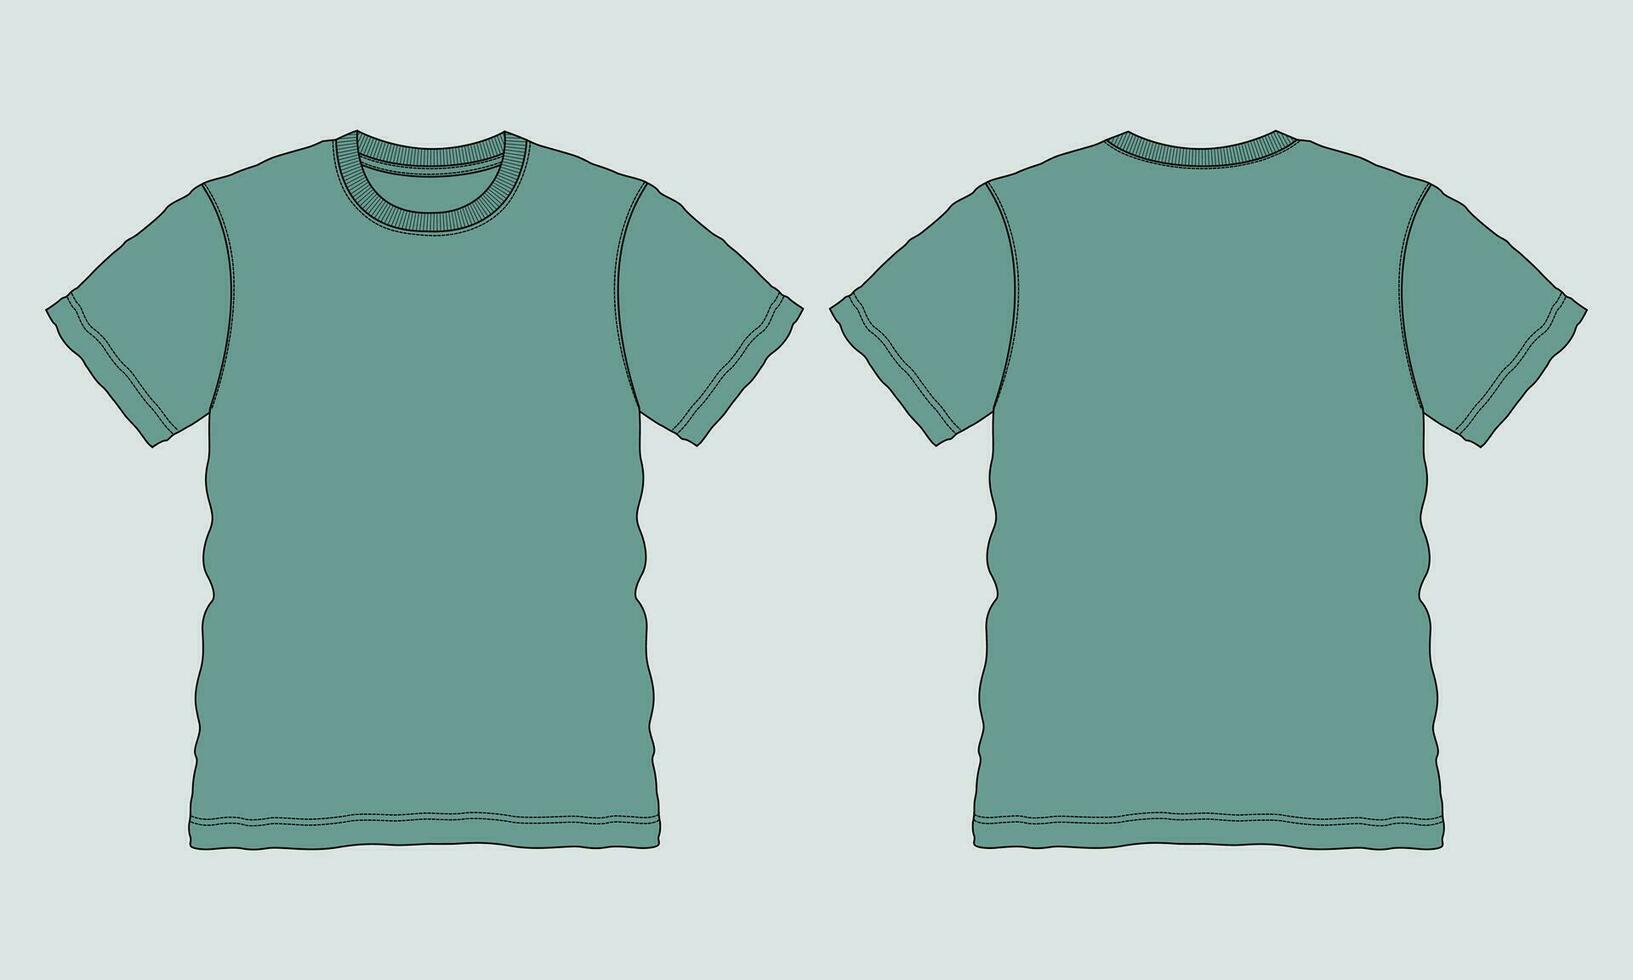 Regular fit Short sleeve T-shirt technical Sketch fashion Flat Template With Round neckline Front and back view. Clothing Art Drawing Vector illustration basic apparel design Mock up.